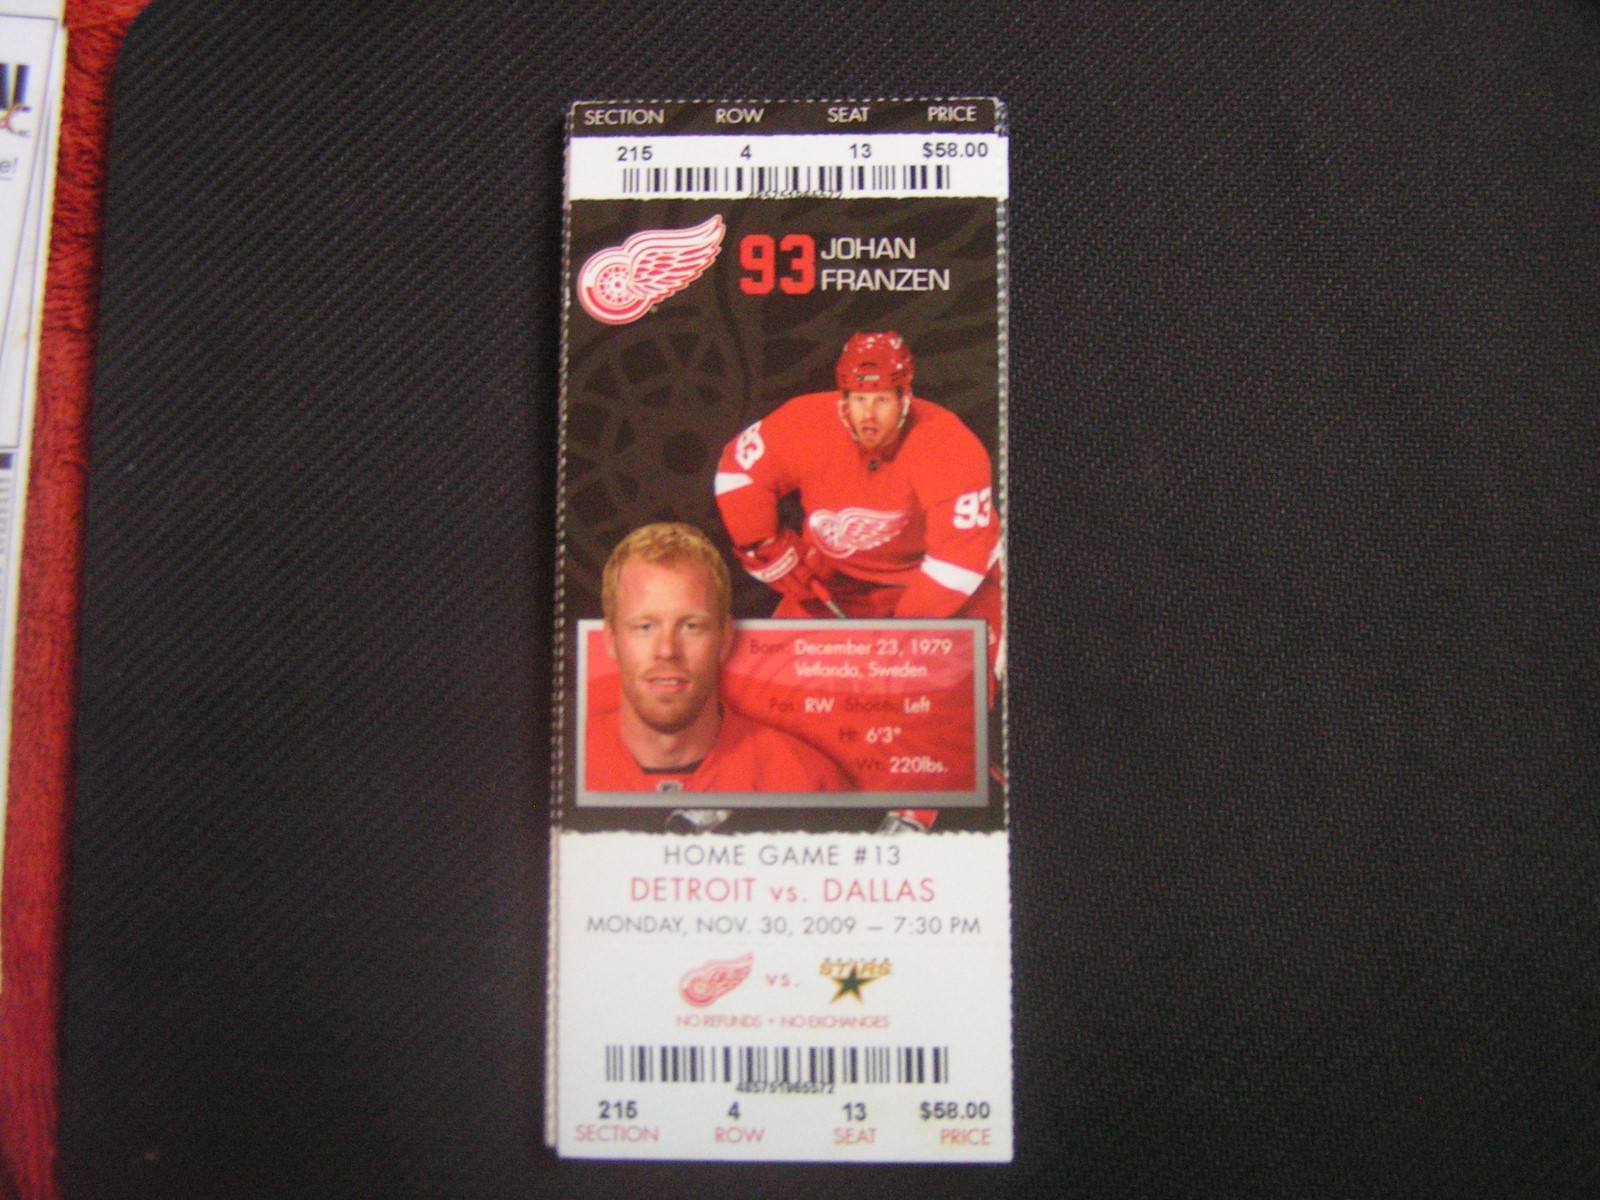 Primary image for NHL 2009-10 Detroit Red Wings Ticket Stub Vs Dallas 11-30-09